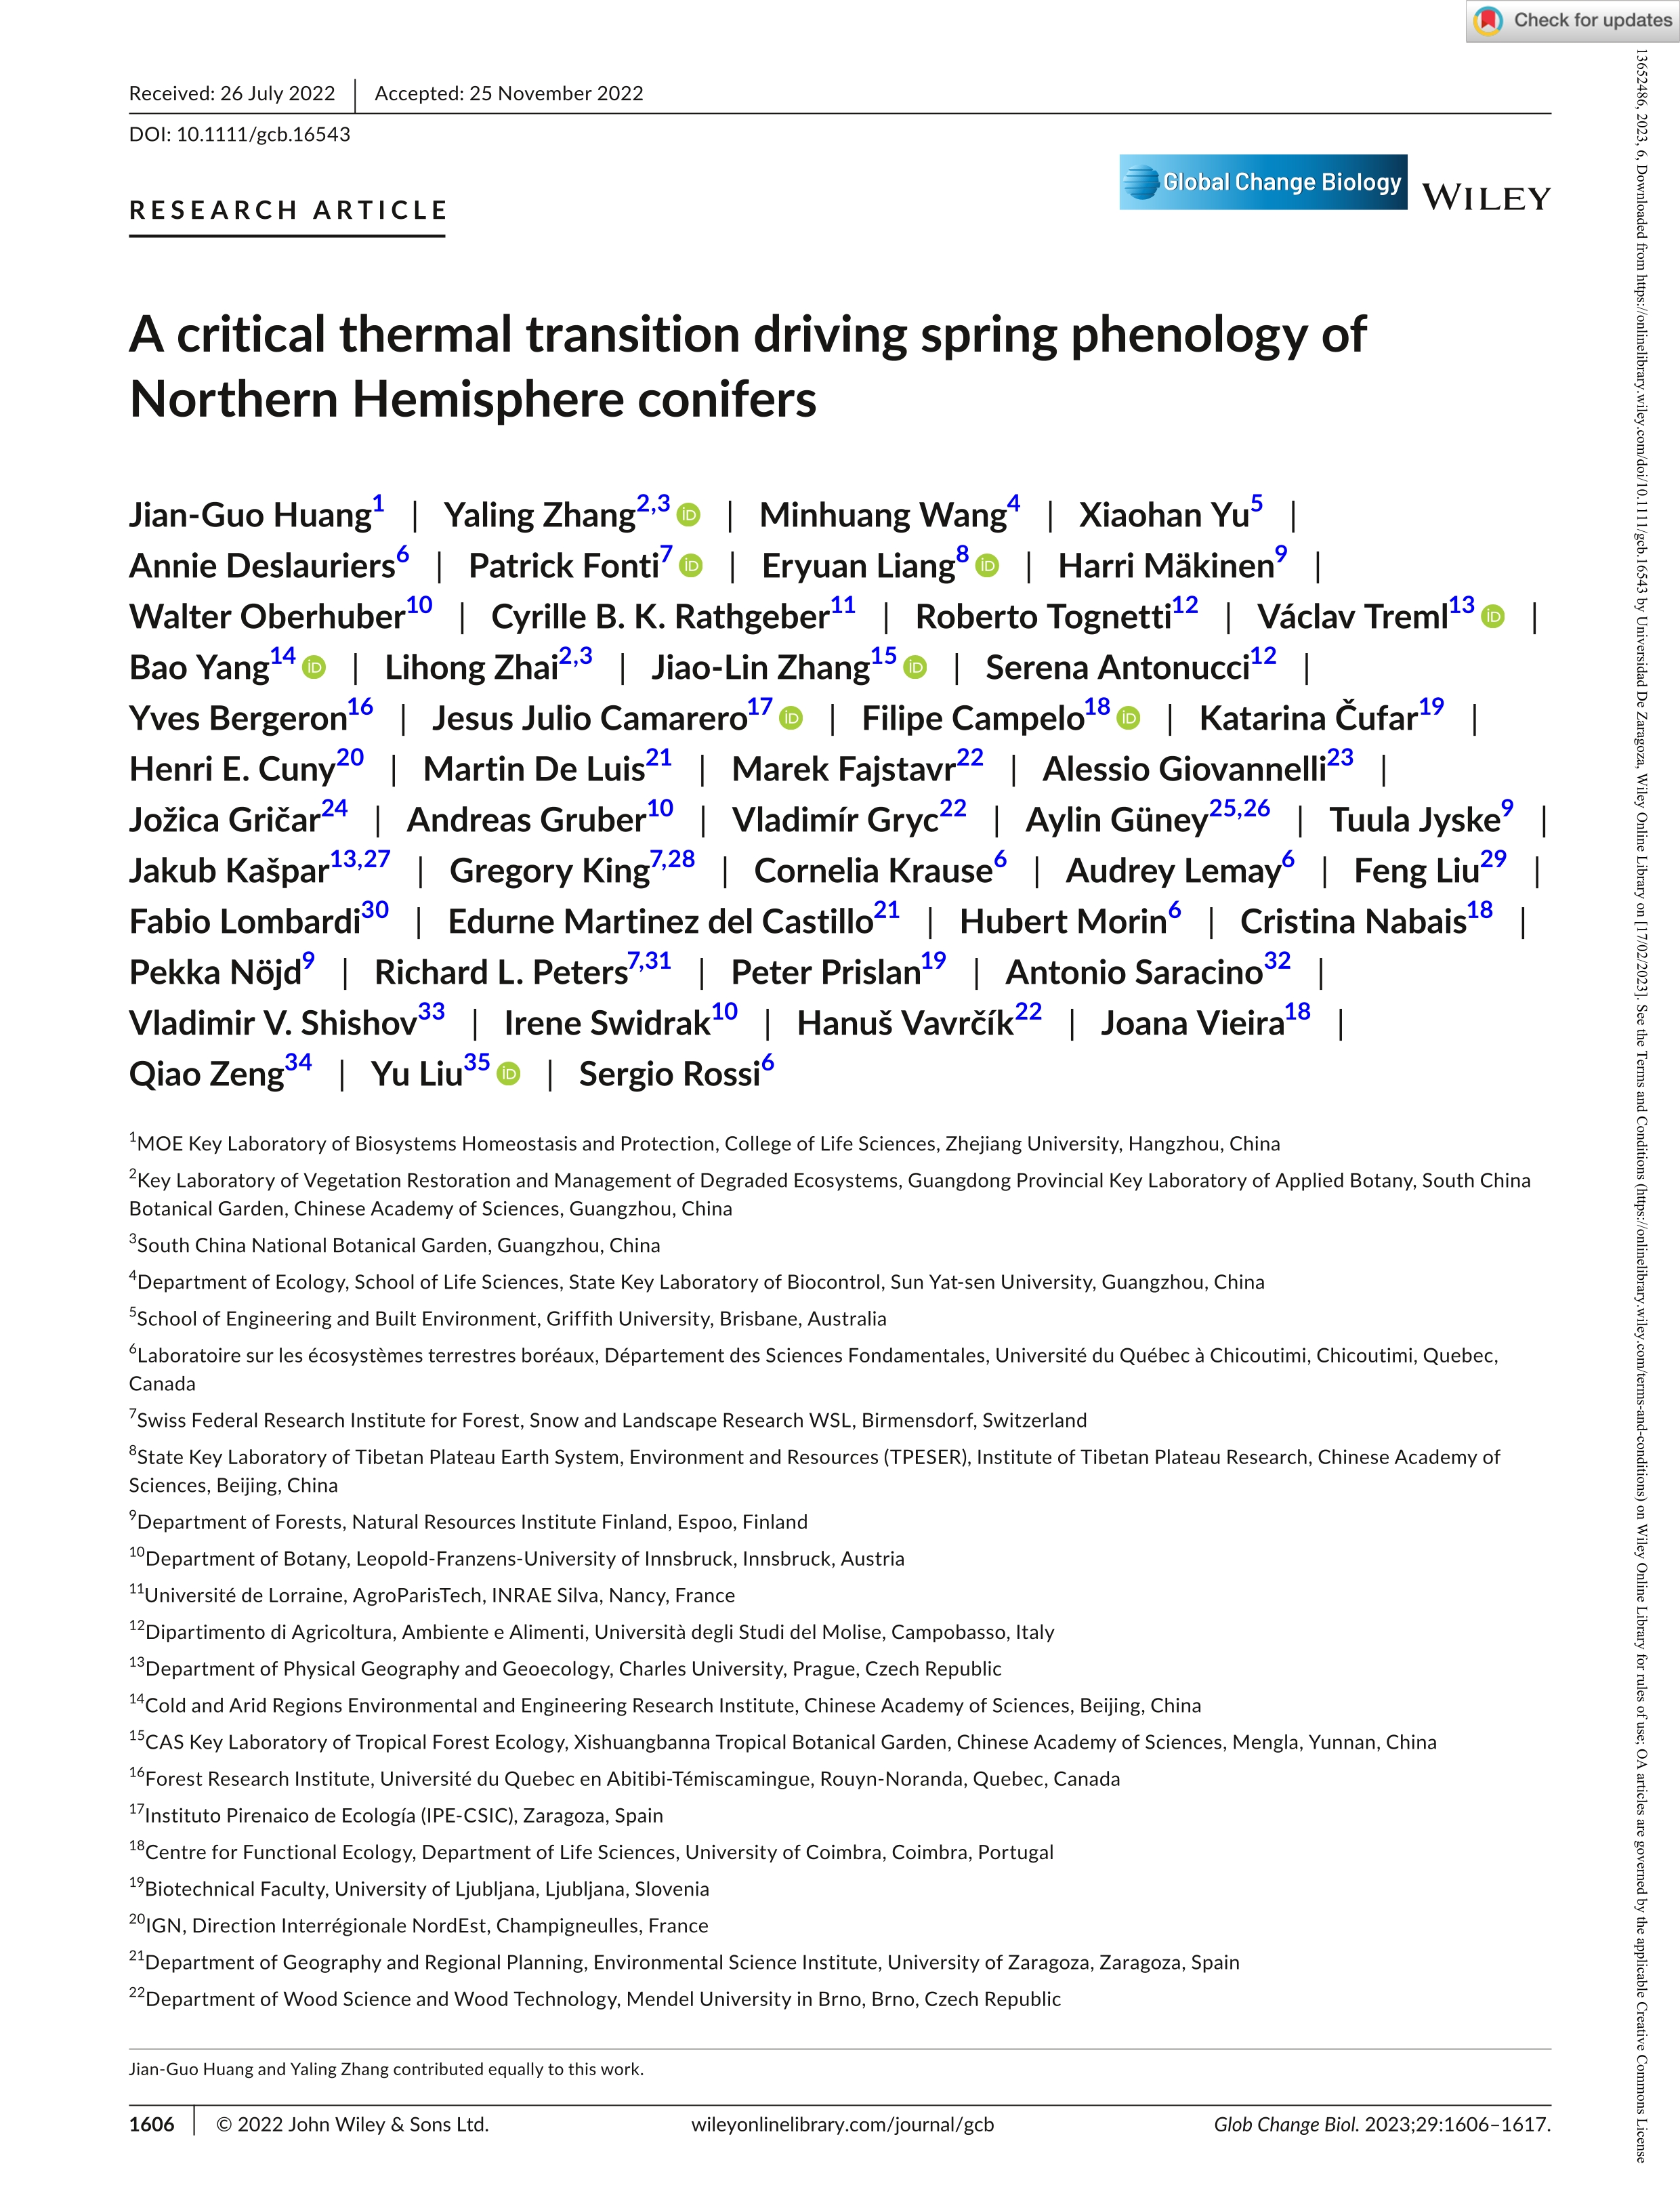 A critical thermal transition driving spring phenology of Northern Hemisphere conifers